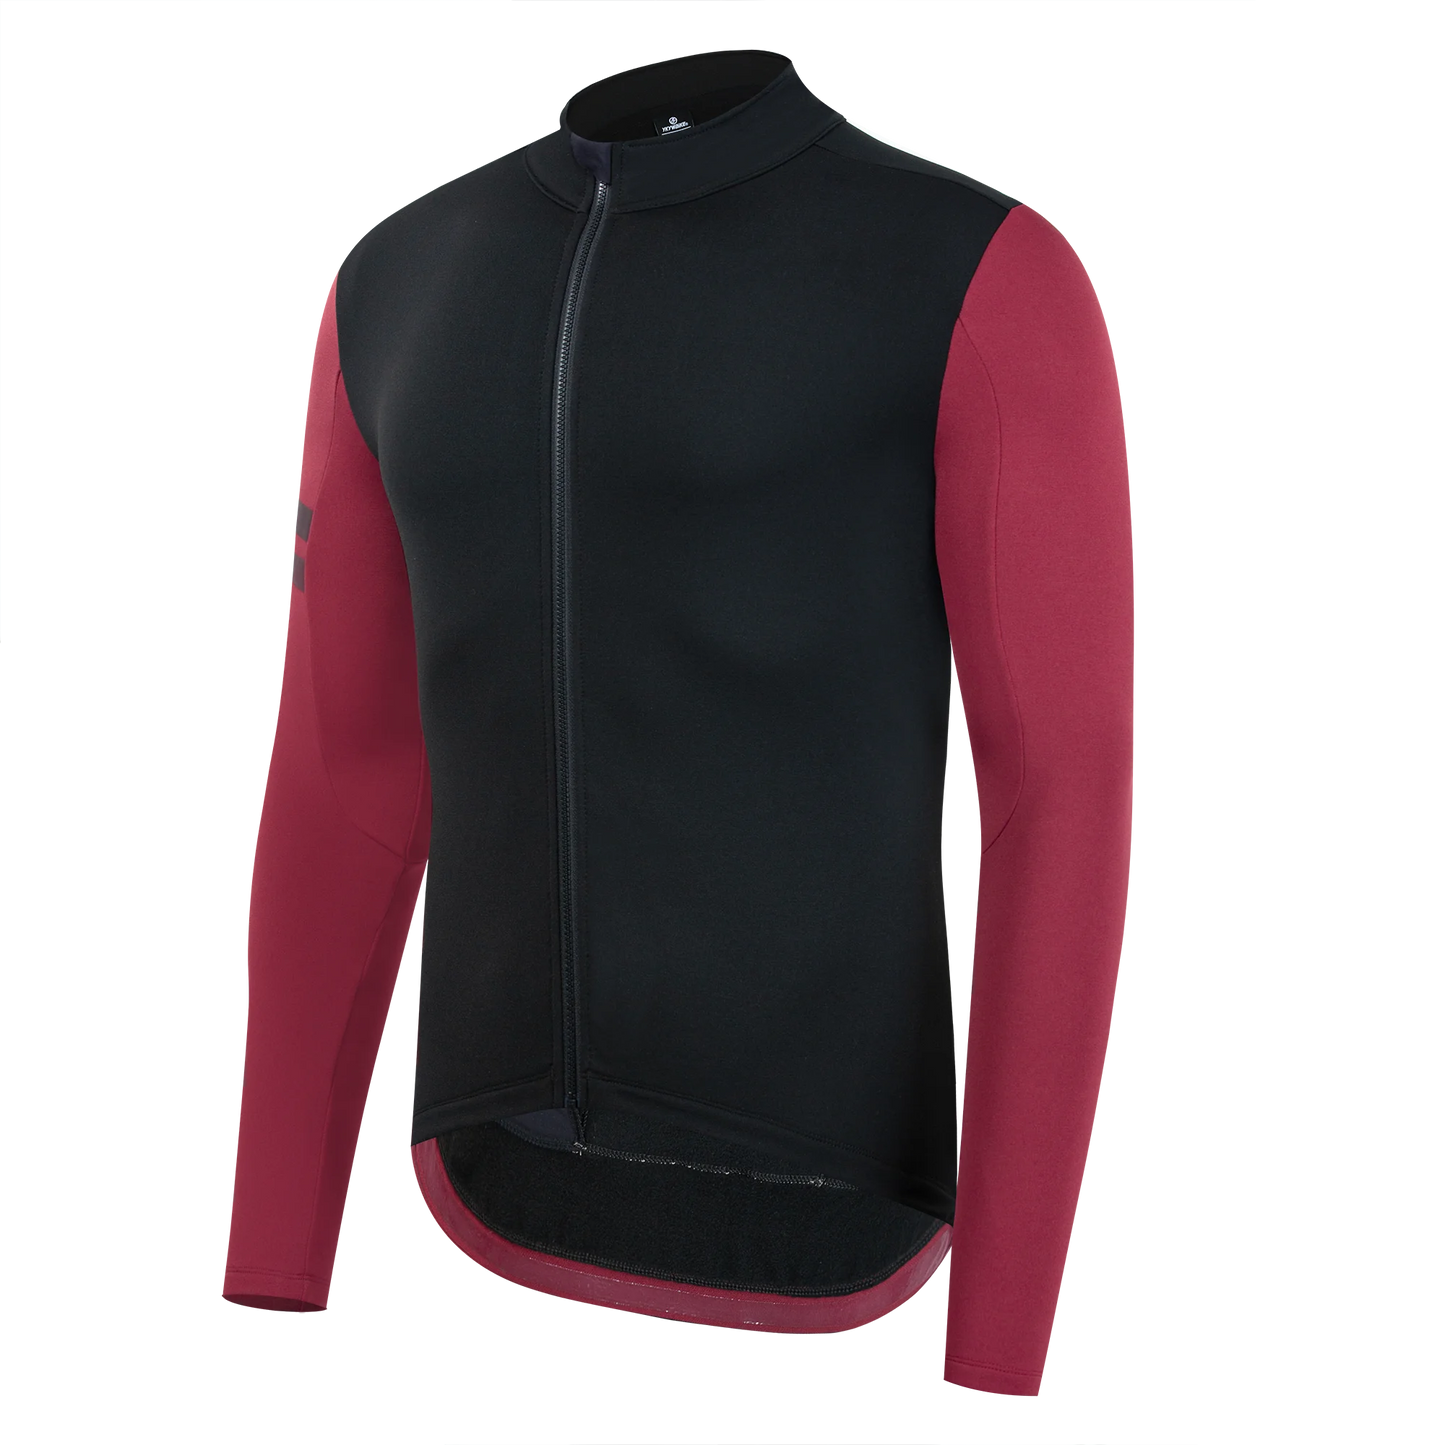 YKYW Men's Cycling Jersey Jacket Winter 5-15℃ Thermal Fleece Spliced Sleeve with Reflective Strips 3+1 Pockets 2 Colors